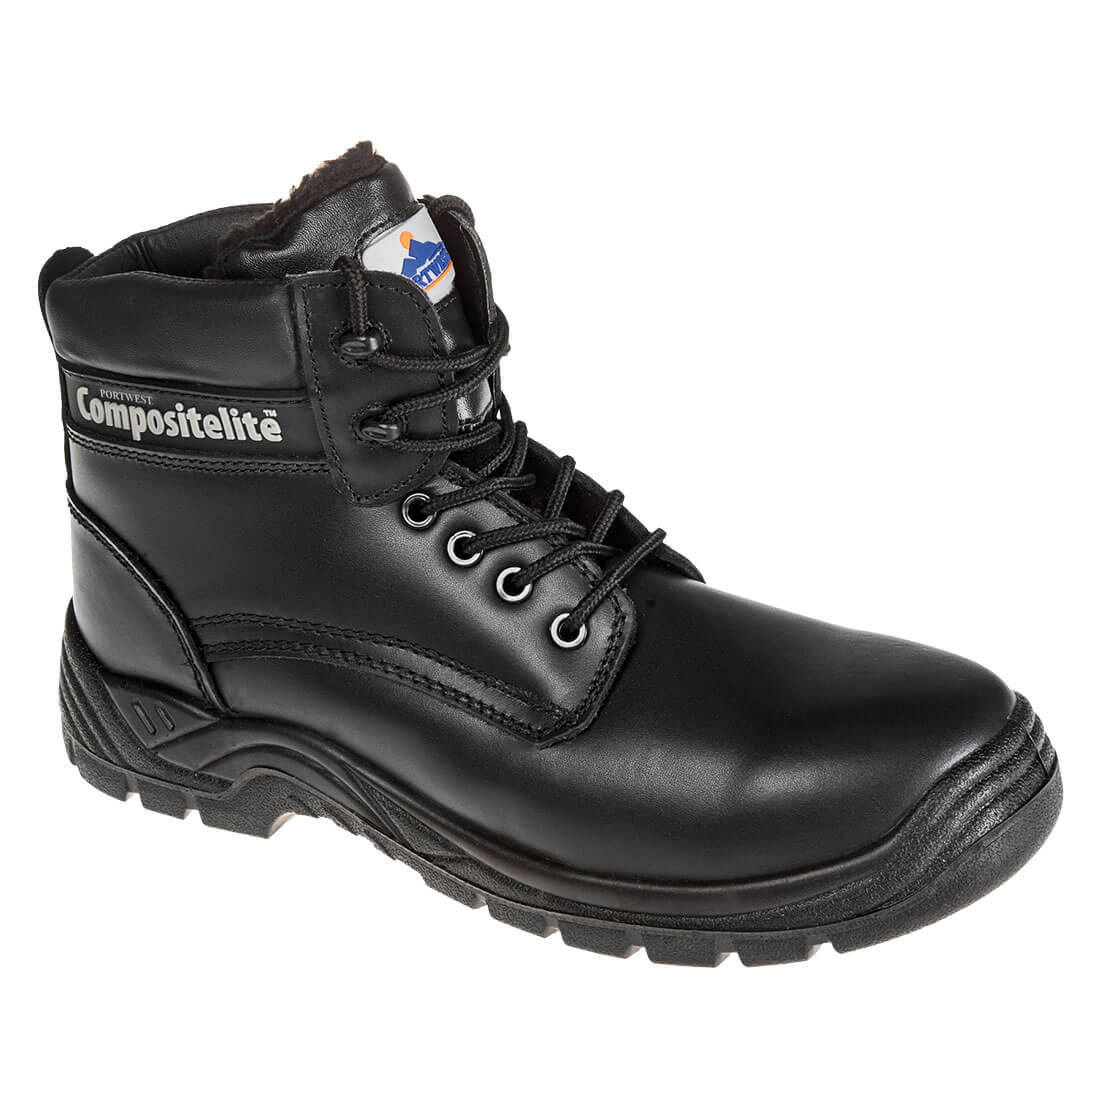 Portwest Thor Fur Lined Cold Weather Safety Boots Black Size 10